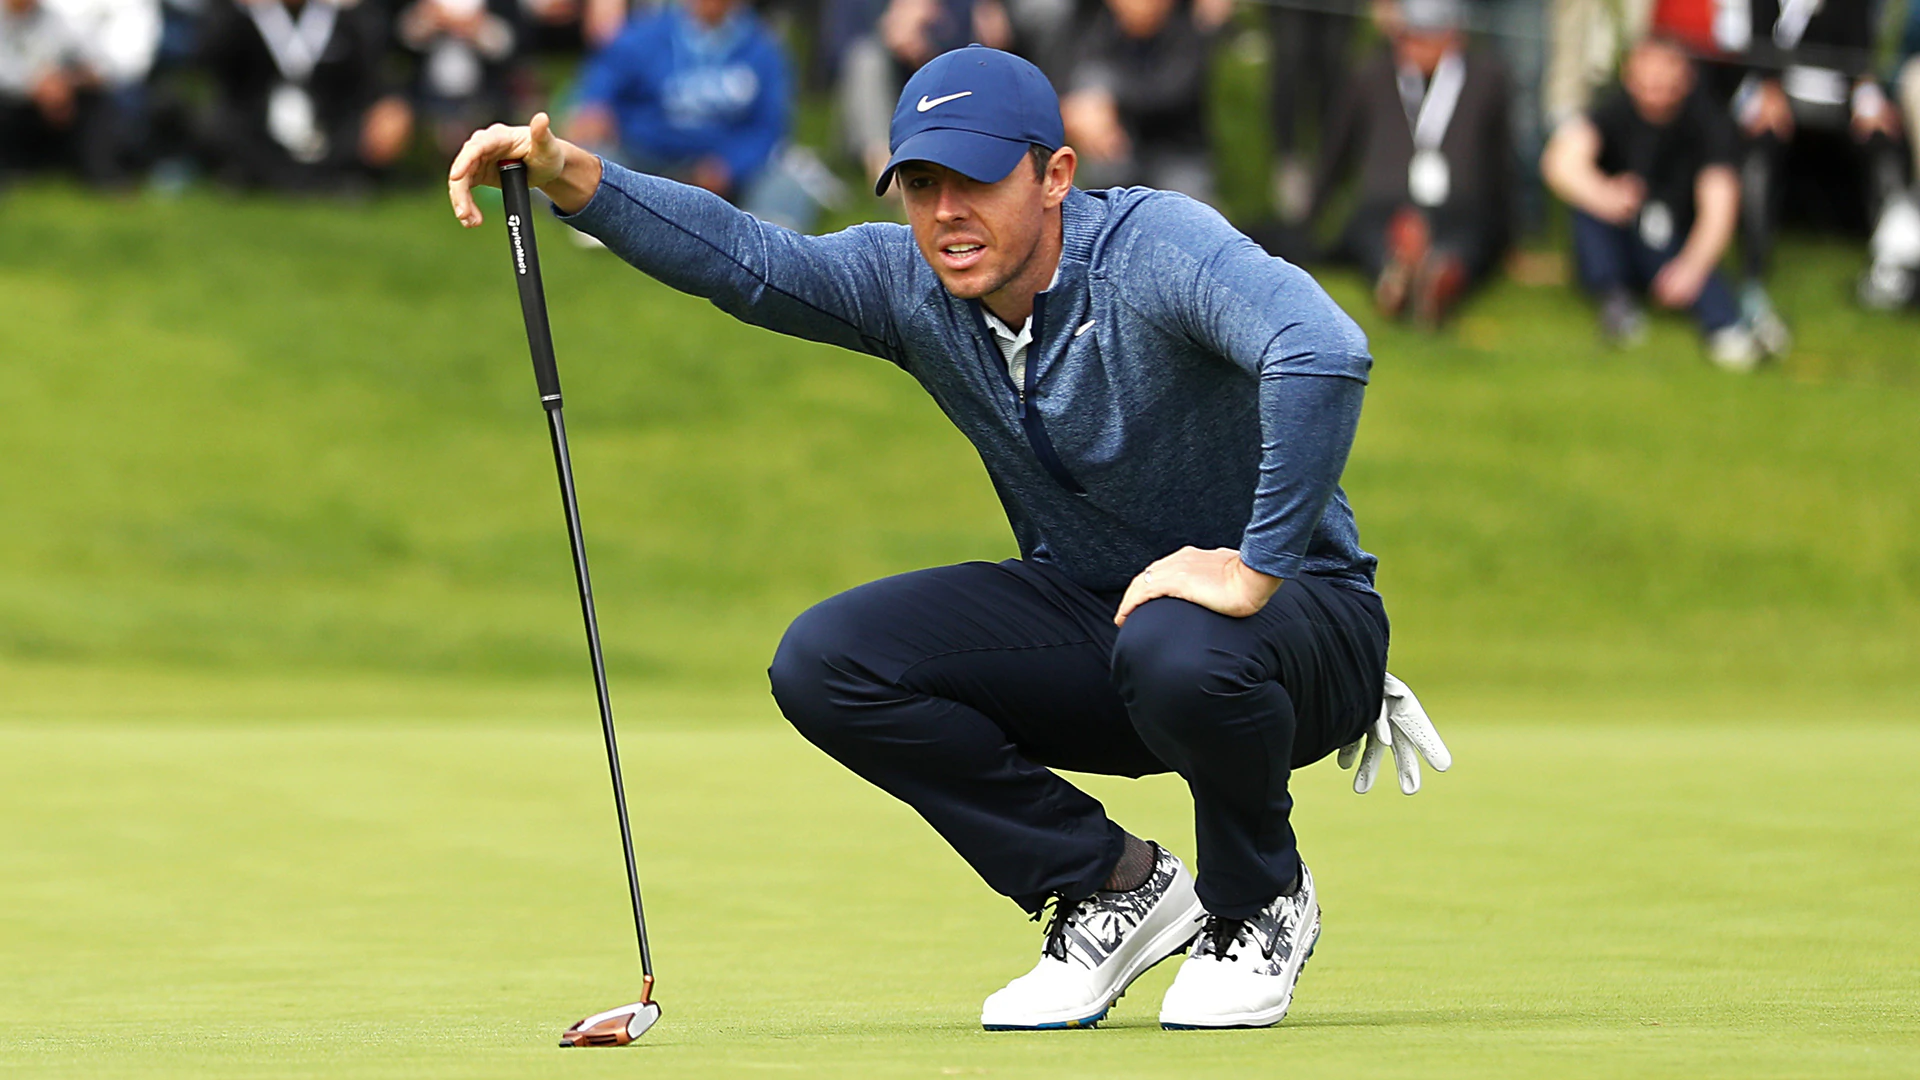 Red-hot putter propels Rory to 63 on Saturday morning